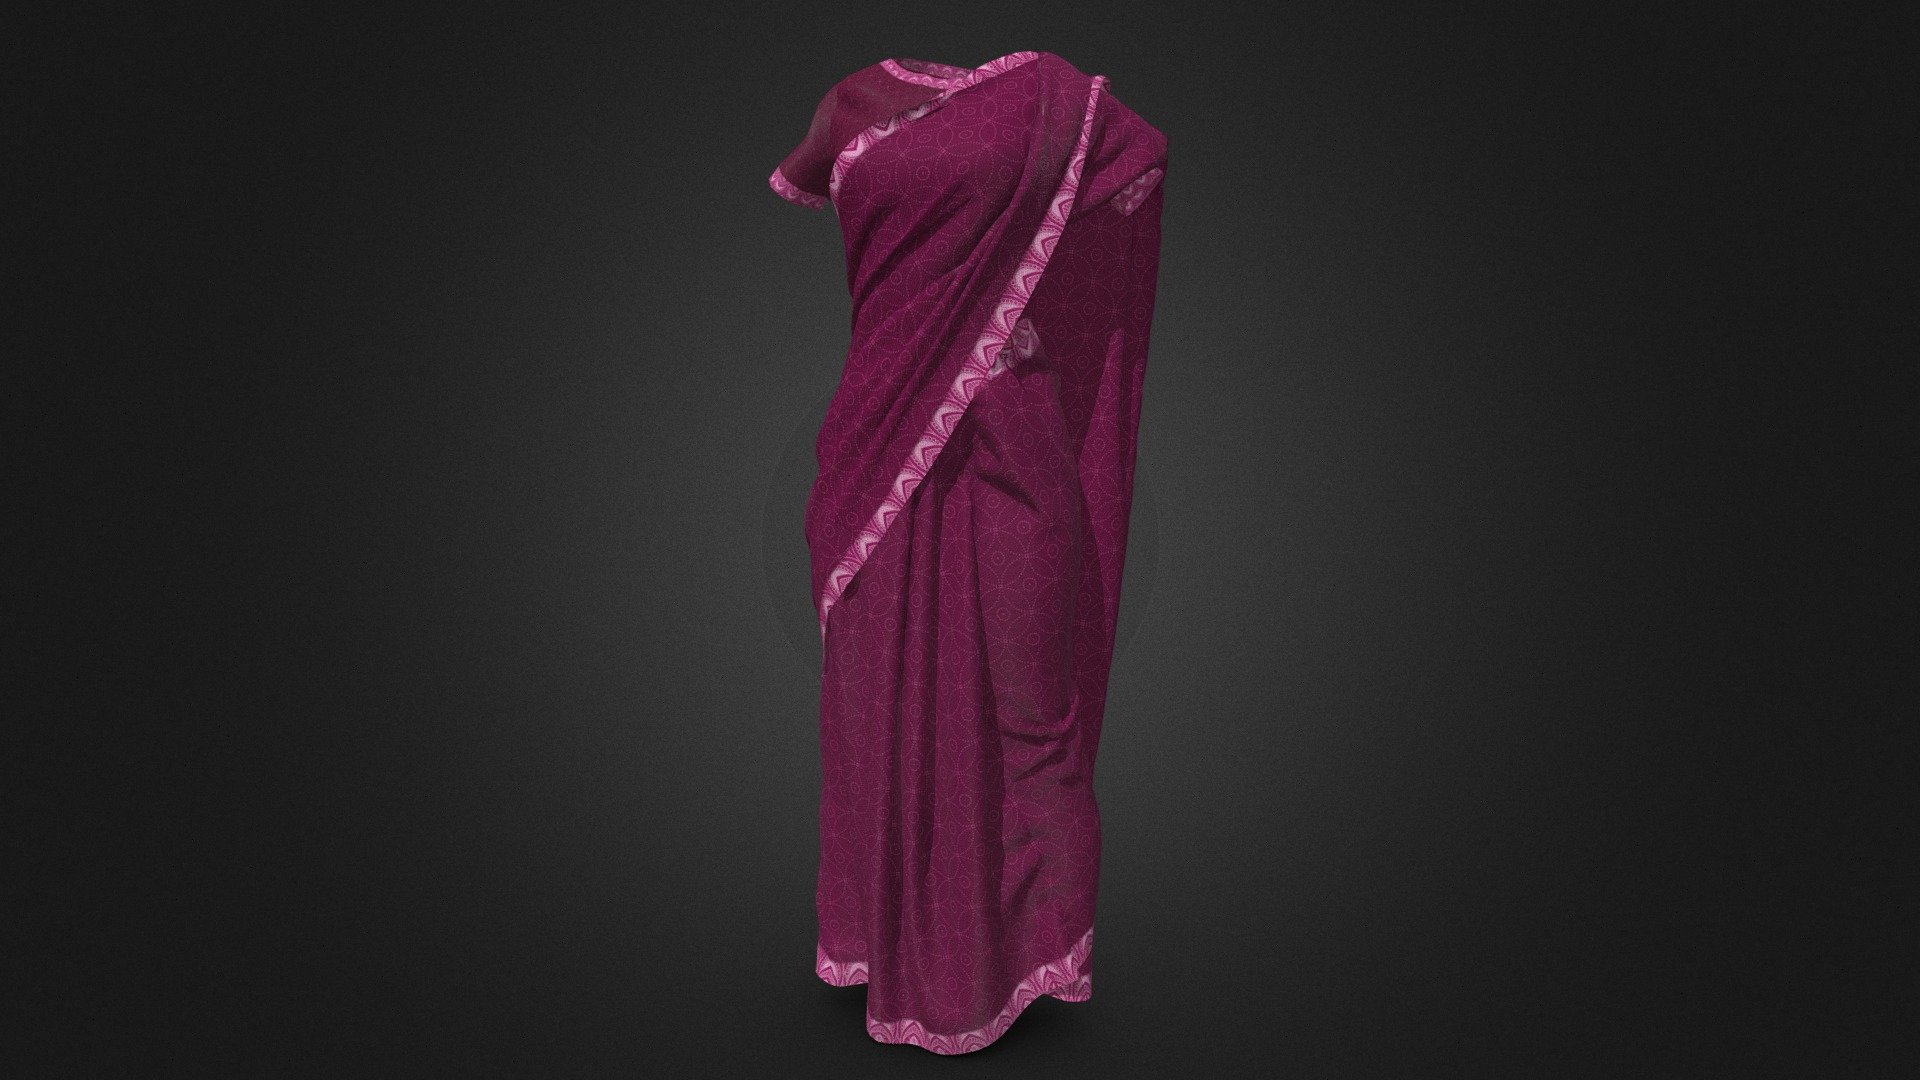 This 3D model of a traditional saree can be use in games. With its intricate details and vibrant colors, it adds a touch of authenticity and culture to any virtual setting. Designed to be lightweight and efficient, it can be easily integrated into any gaming platform without sacrificing quality.

The model can be easily imported and integrated into your game project. With high-quality textures and materials, this 3D model will add a level of authenticity and detail to your game that will enhance the overall player experience.

It contains 4k PBR Texture. 

Vertices: 26334 Triangles: 51776 - Traditional Cloth : Saree for Games - Buy Royalty Free 3D model by Studio 23 (@studio23) 3d model